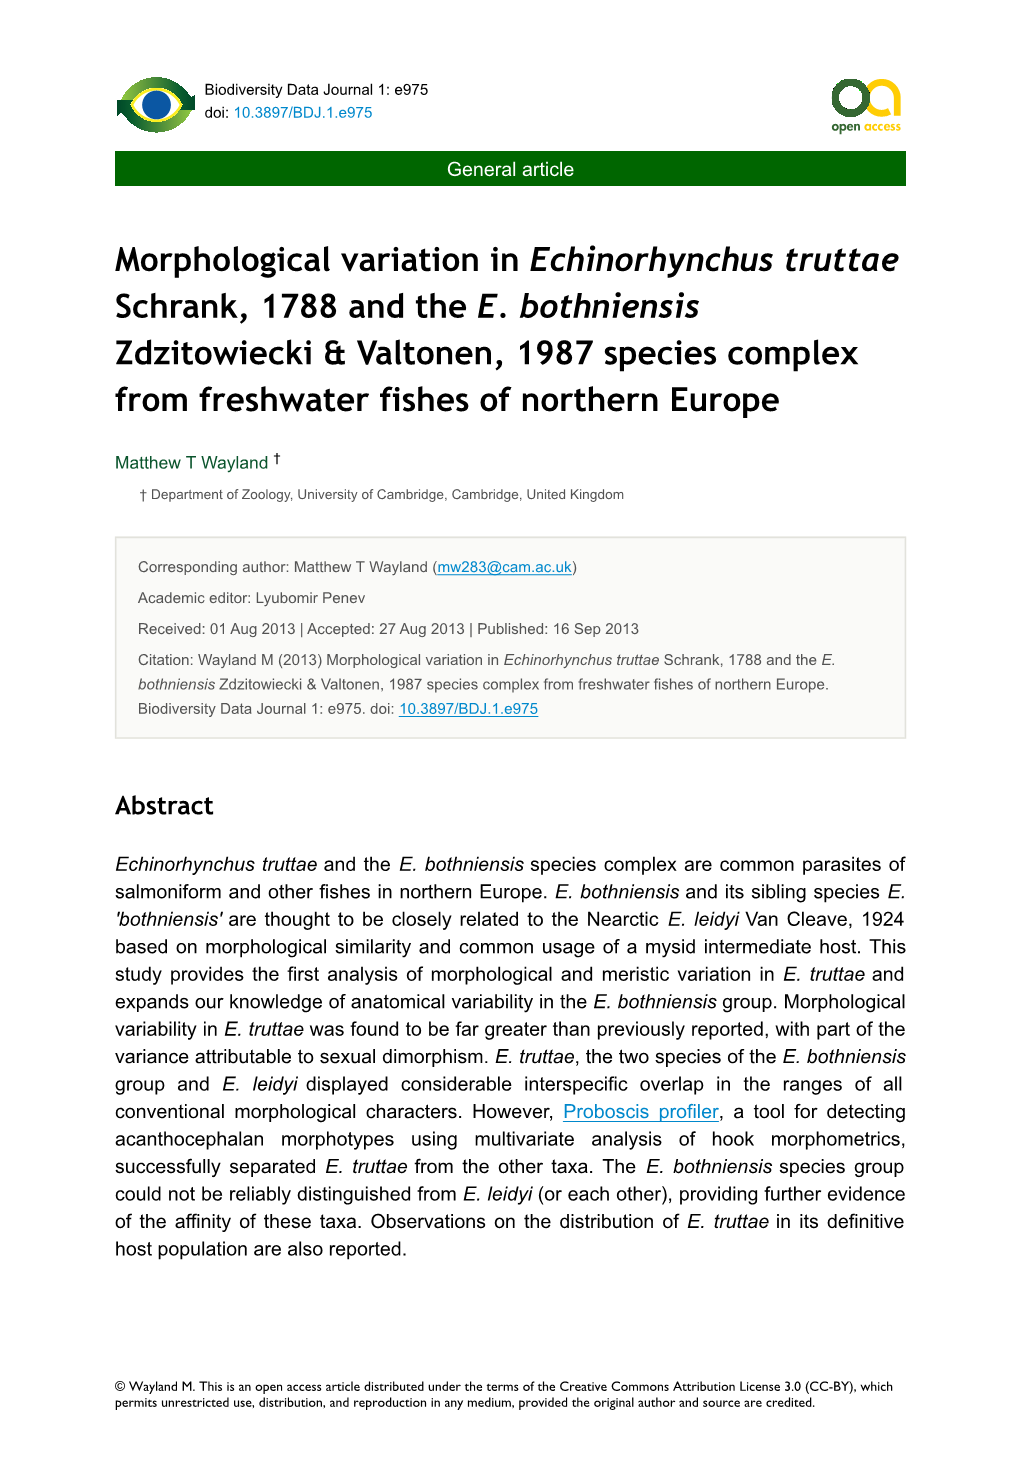 Morphological Variation in Echinorhynchus Truttae Schrank, 1788 and the E